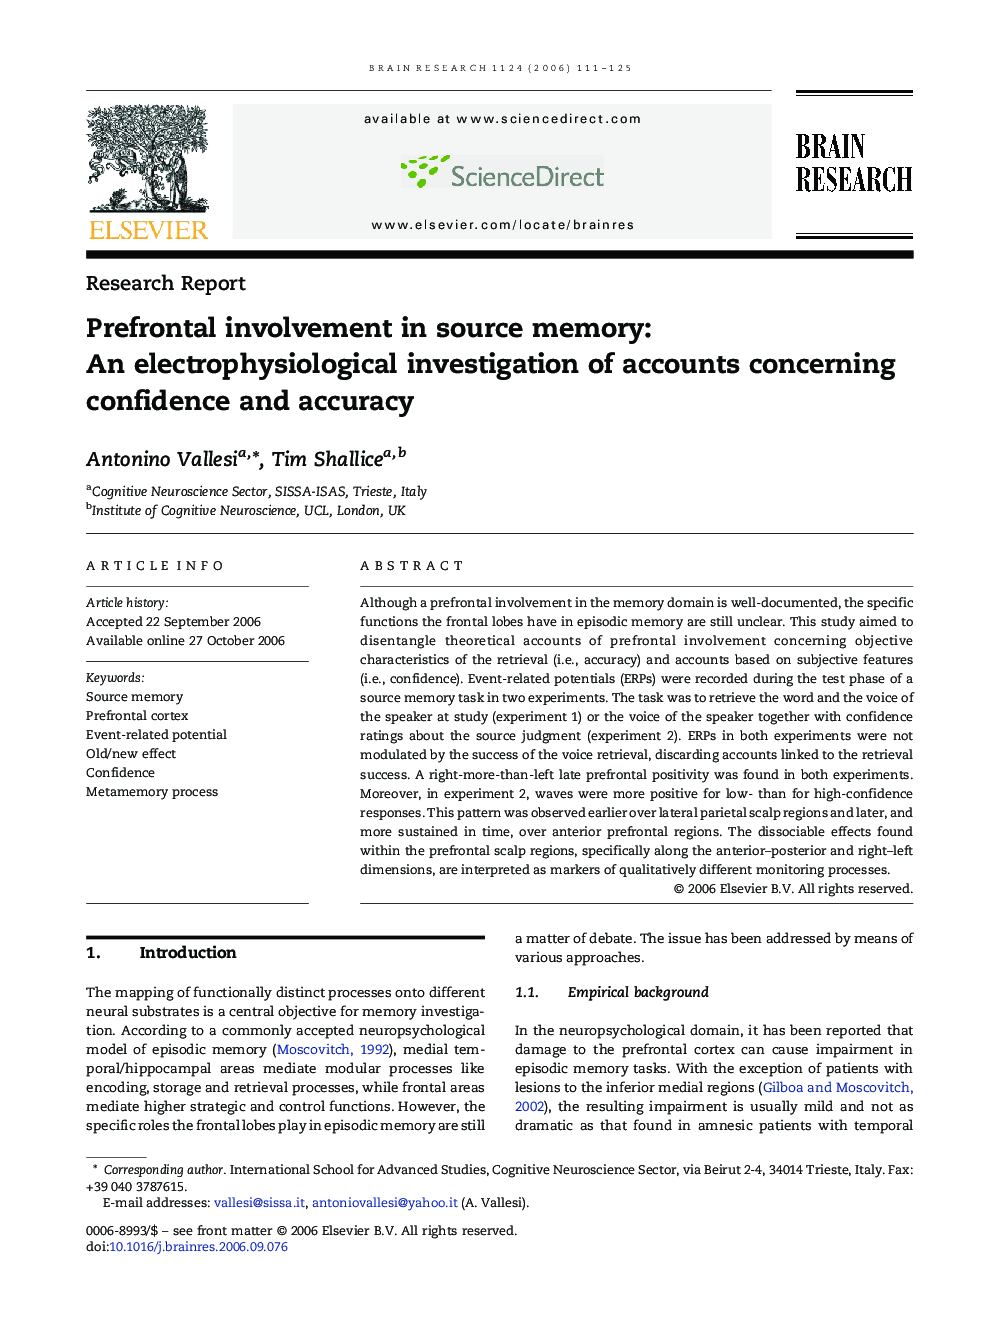 Prefrontal involvement in source memory: An electrophysiological investigation of accounts concerning confidence and accuracy